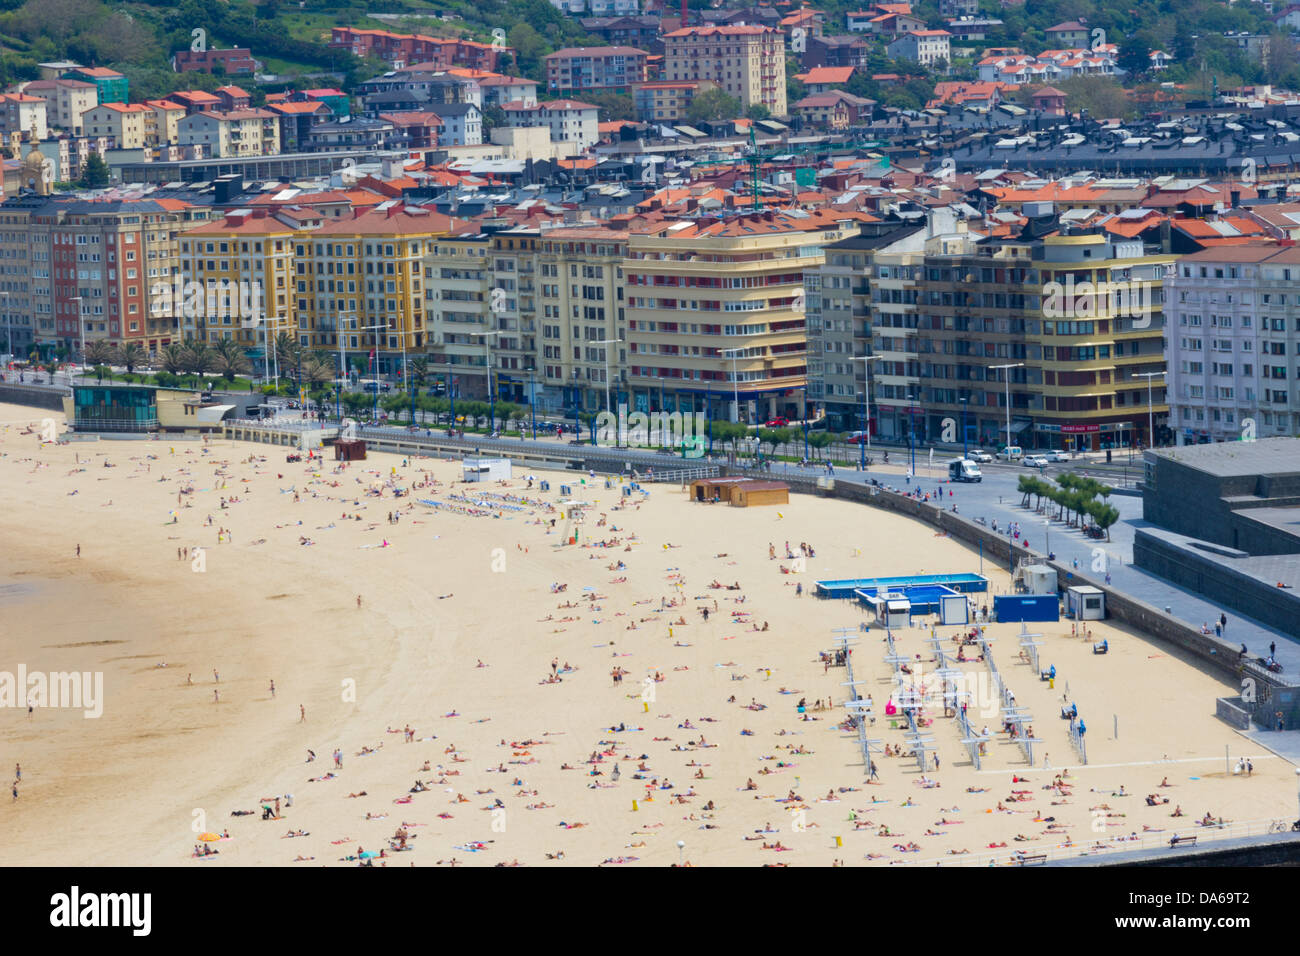 Looking down at the beach in Donostia - San Sebastian in the Basque Country Stock Photo